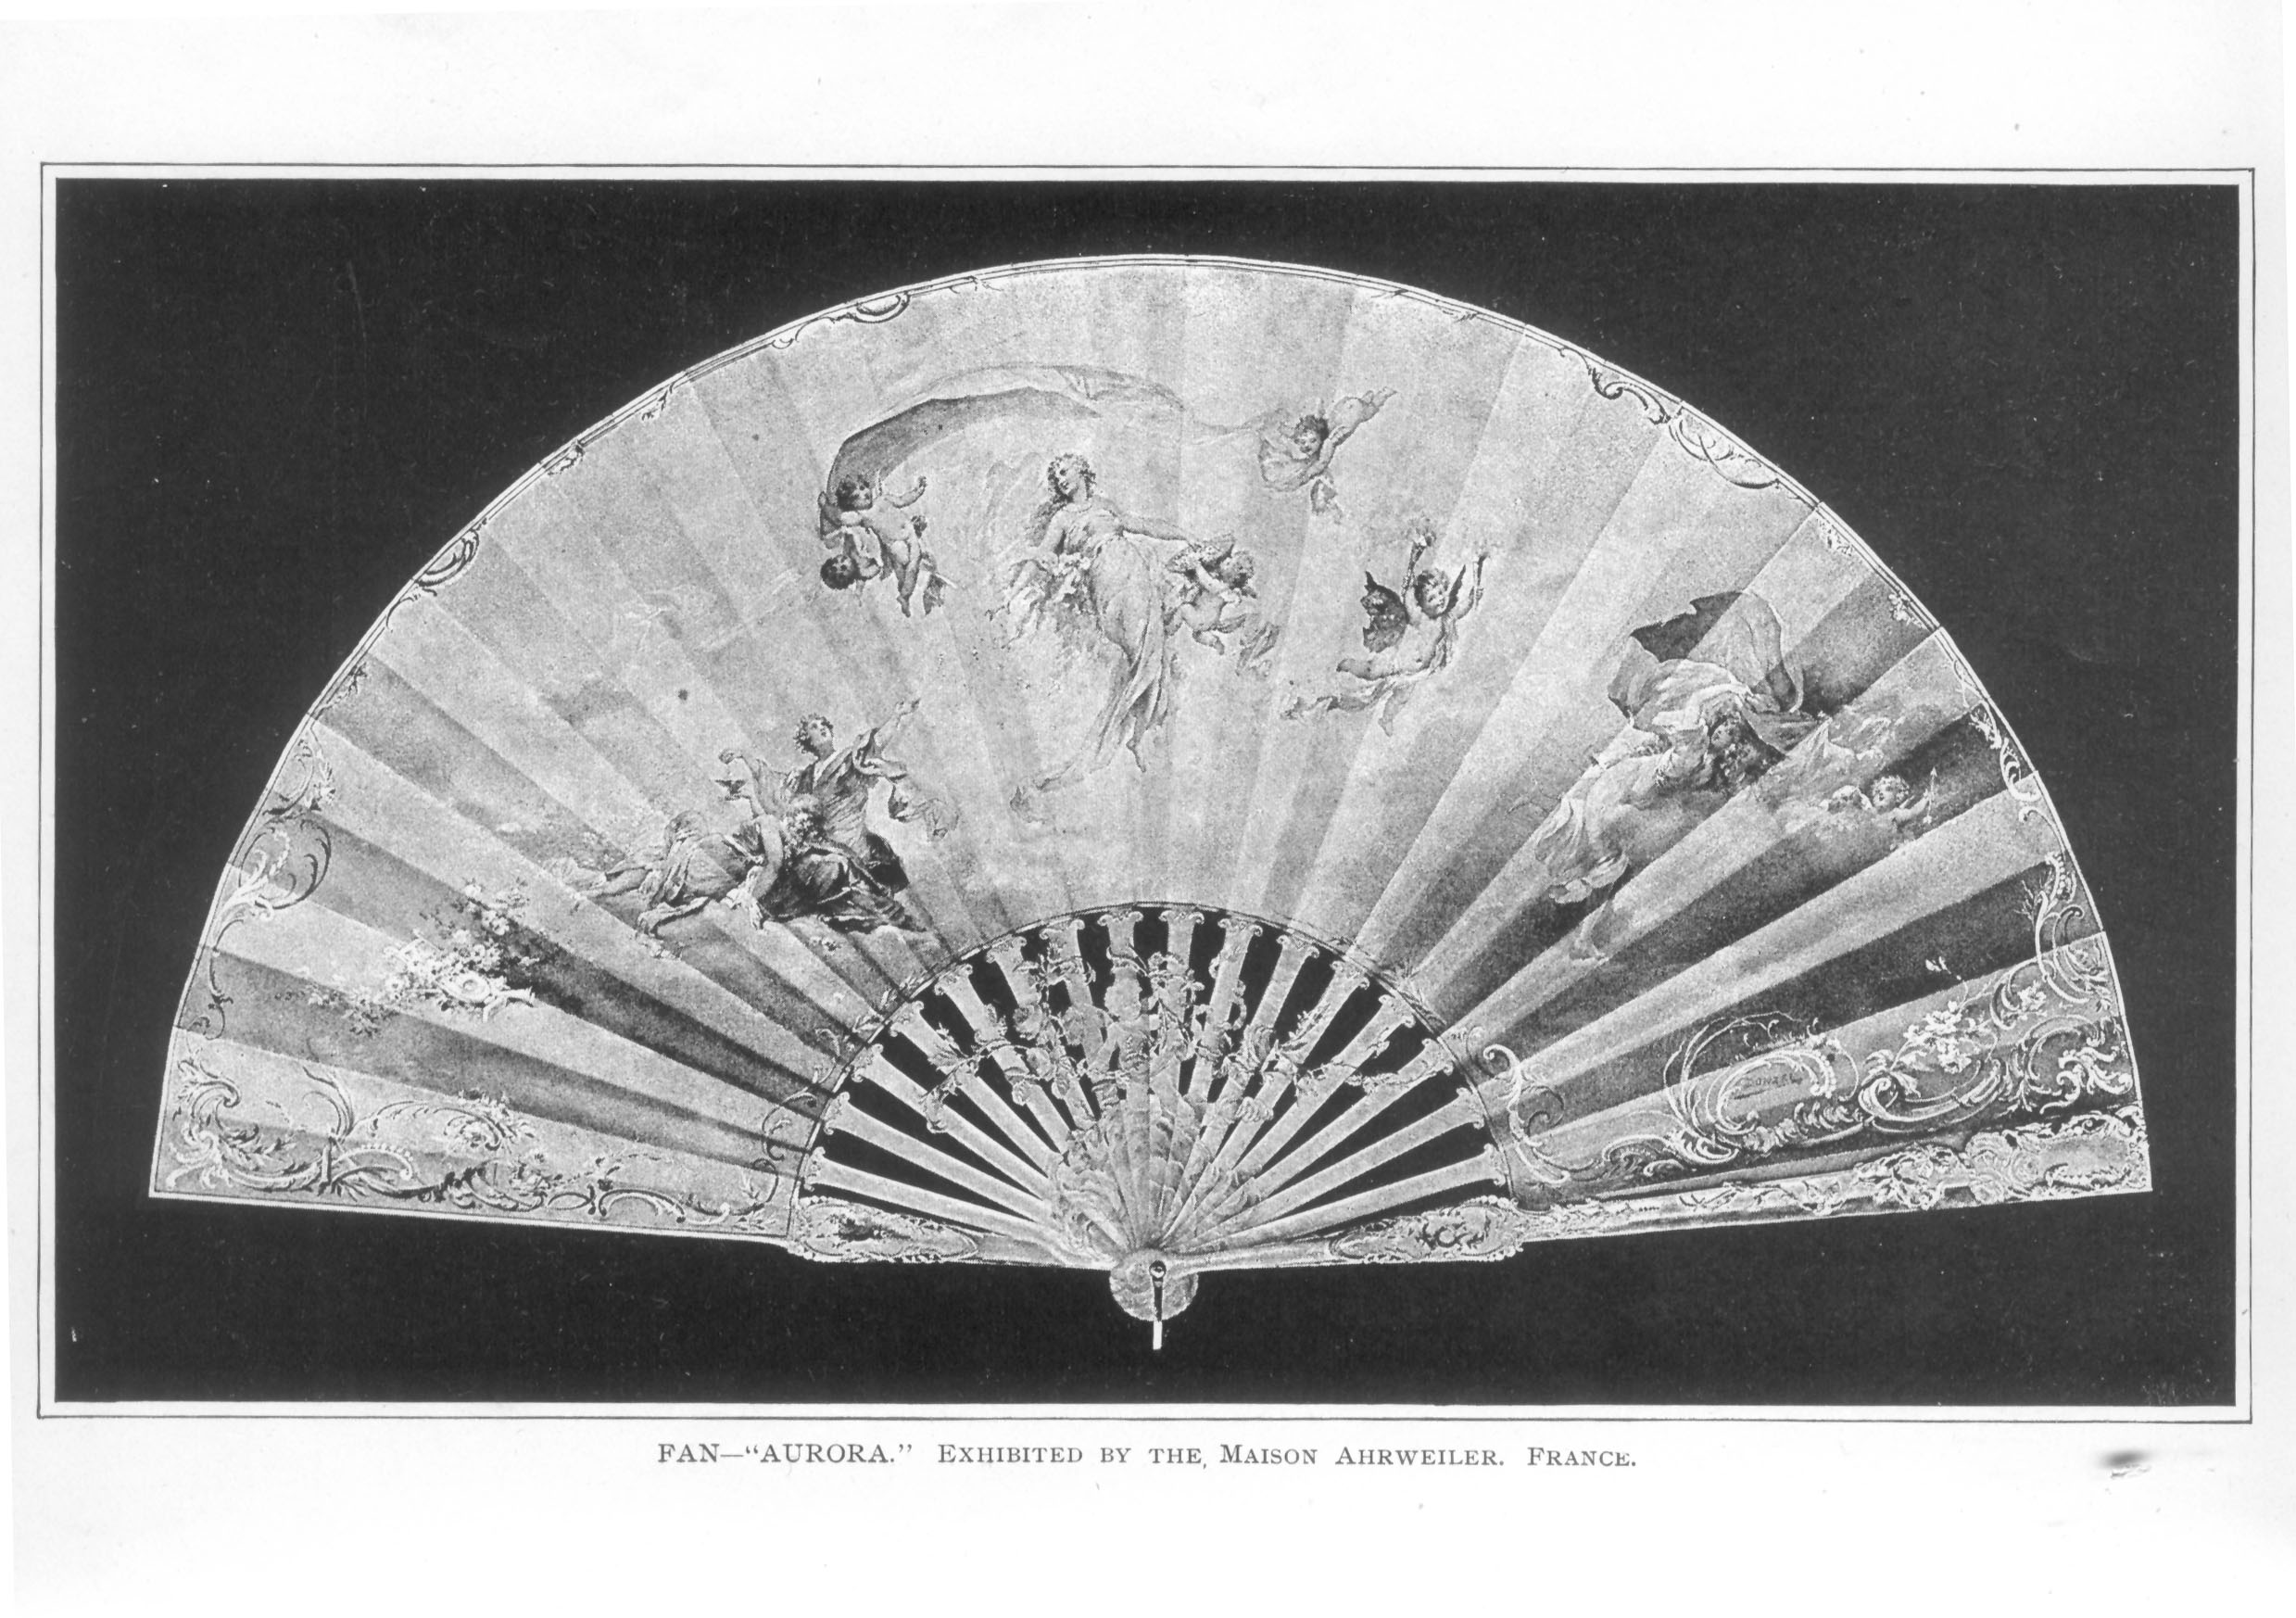 open fan with painting gradation of dawn on one side to night on the other, goddess Aurora floats in center with putti